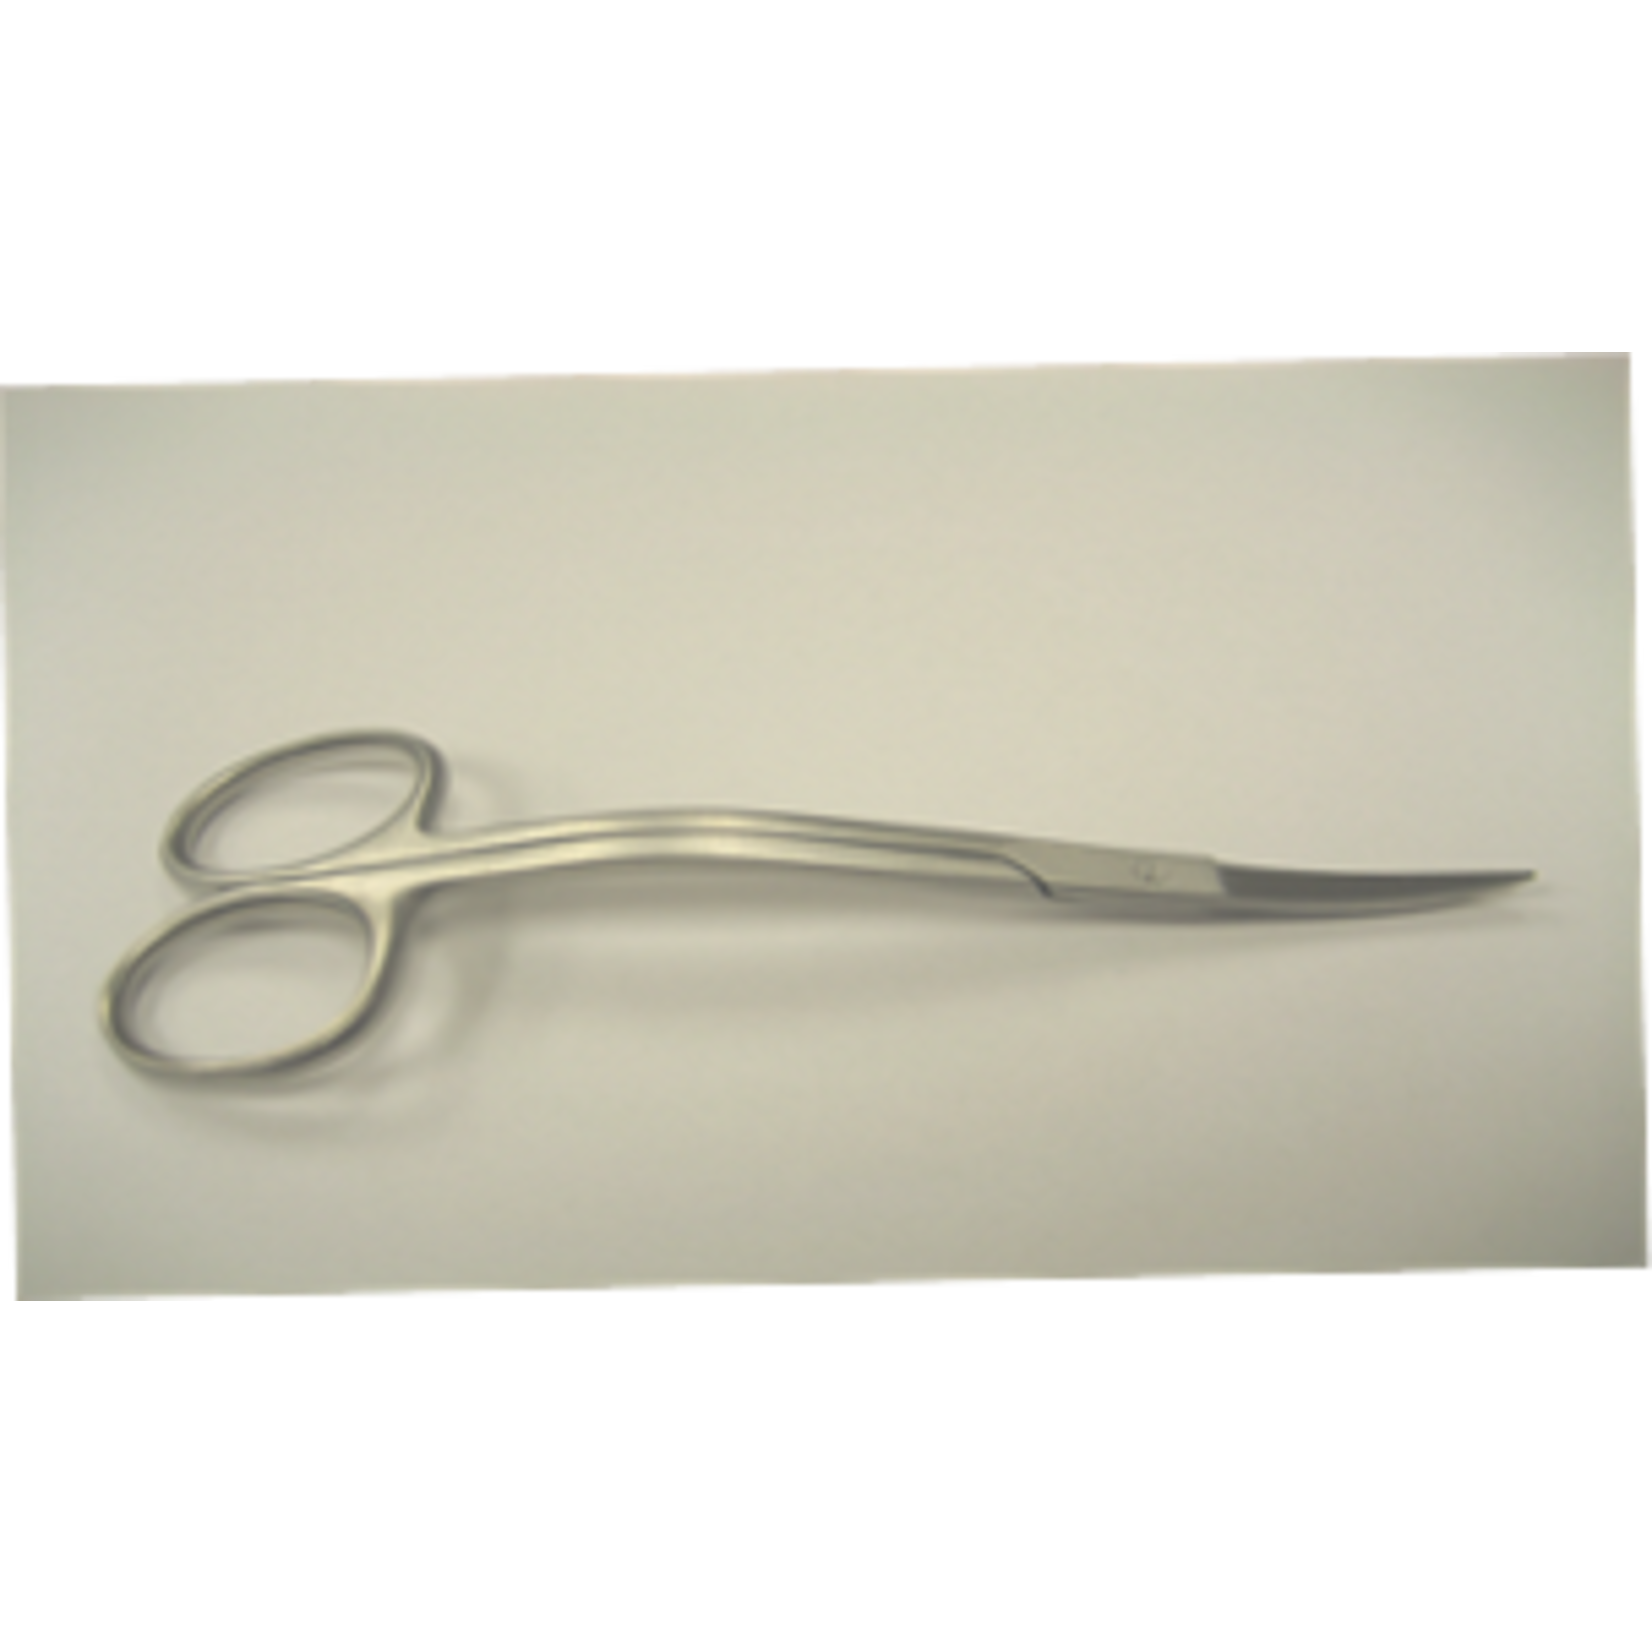 DOUBLE CURVED 4.5” EMBROIDERY SCISSORS